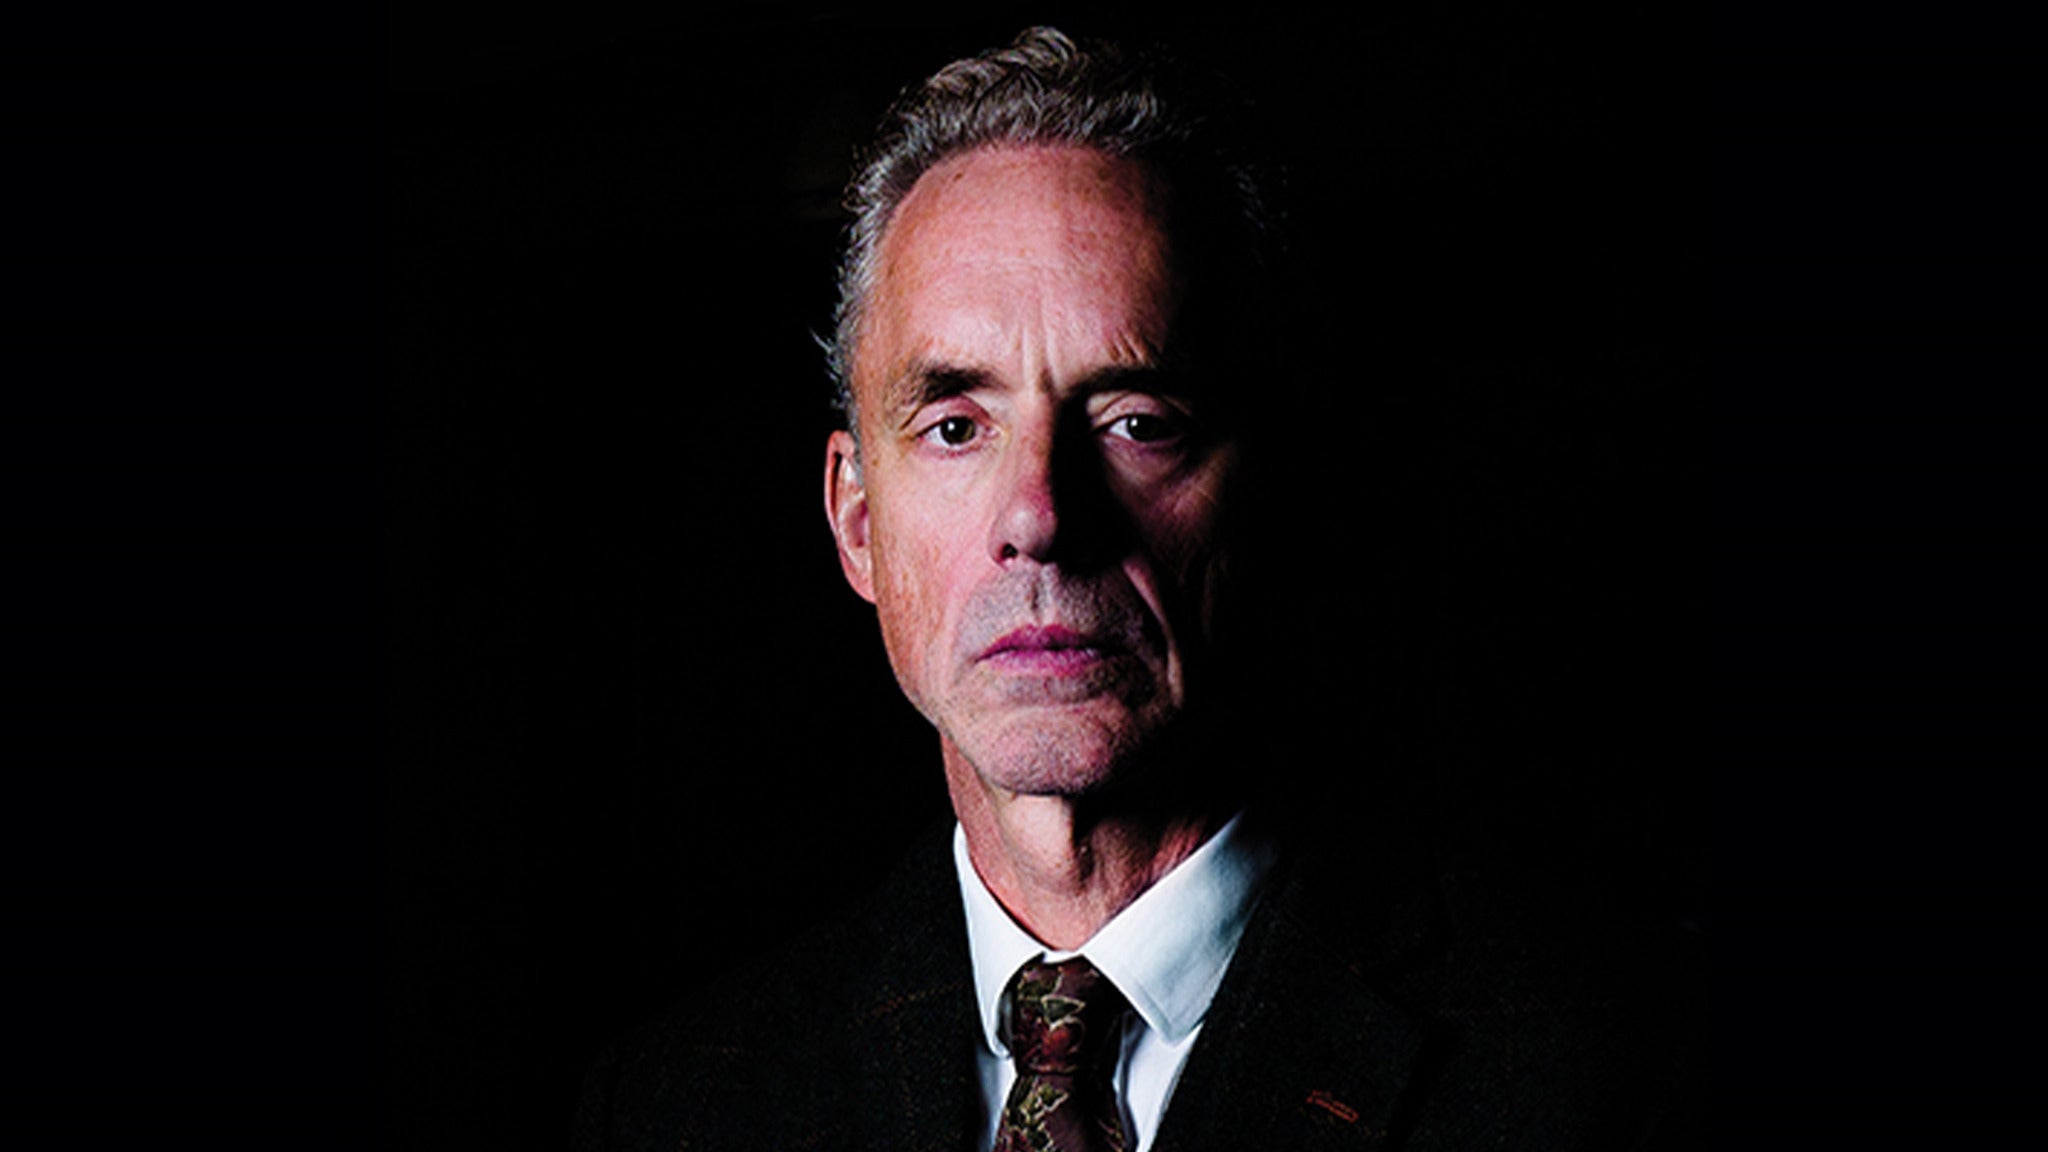 Image used with permission from Ticketmaster | Dr. Jordan Peterson tickets